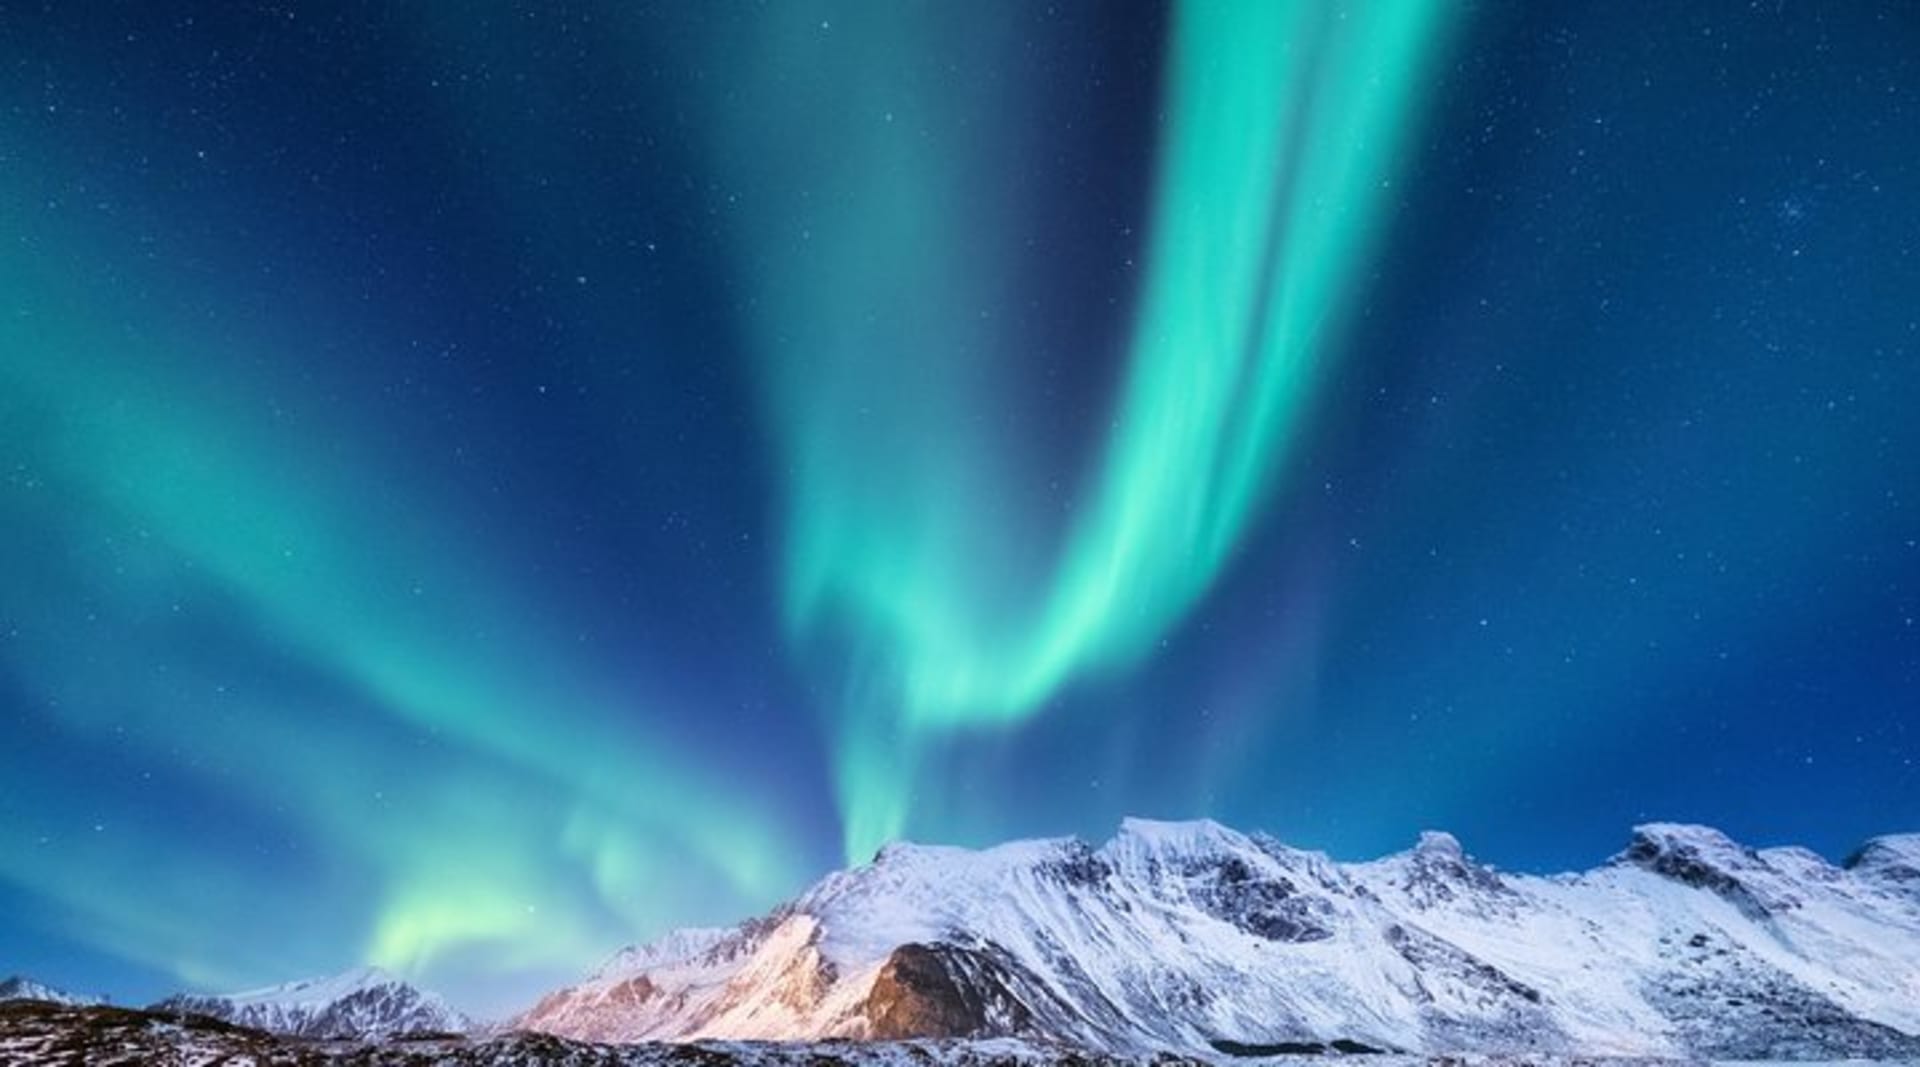 Northern Lights over a snow-covered mountain in Iceland